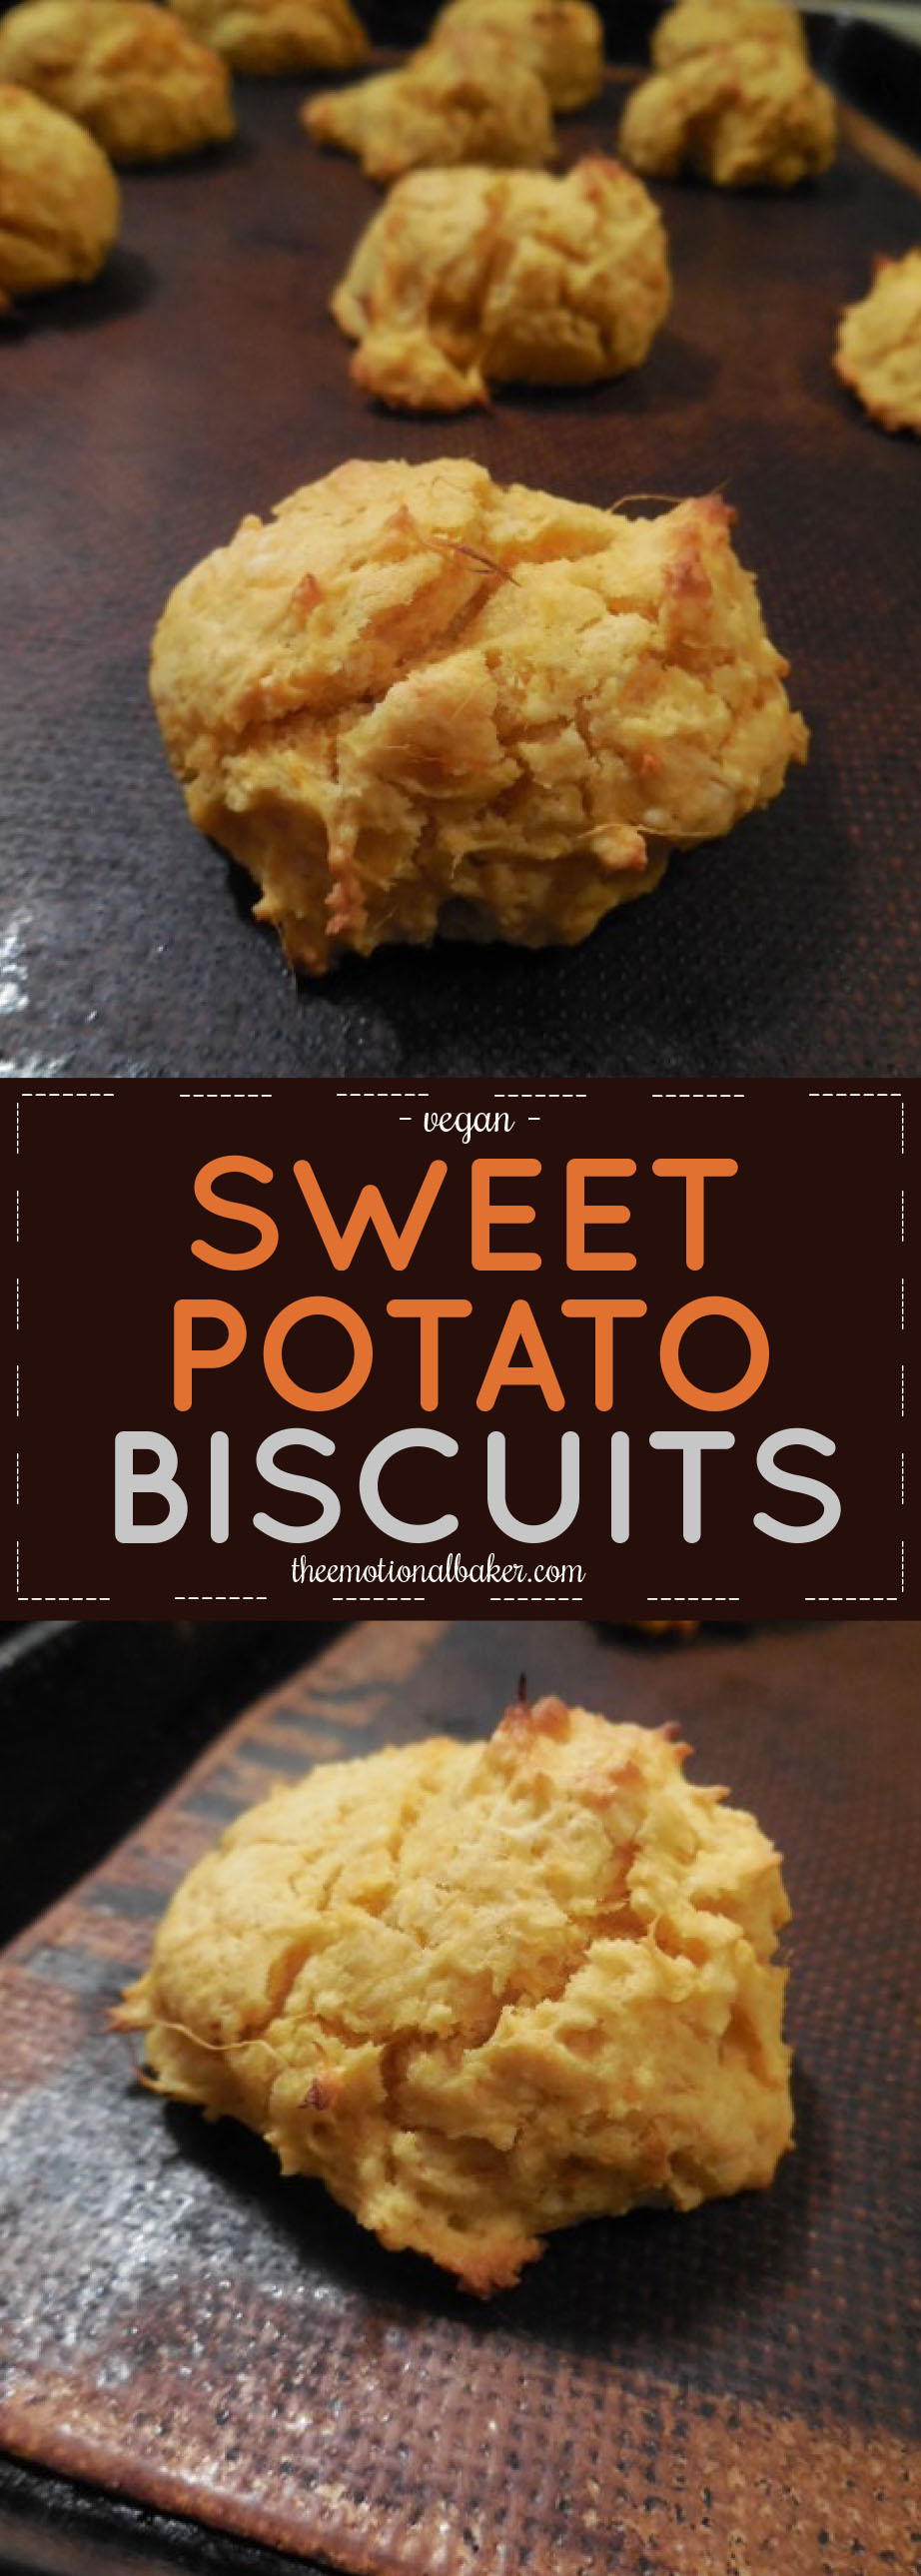 Easy, vegan sweet potato biscuit recipe perfect for pairing with soup or chili